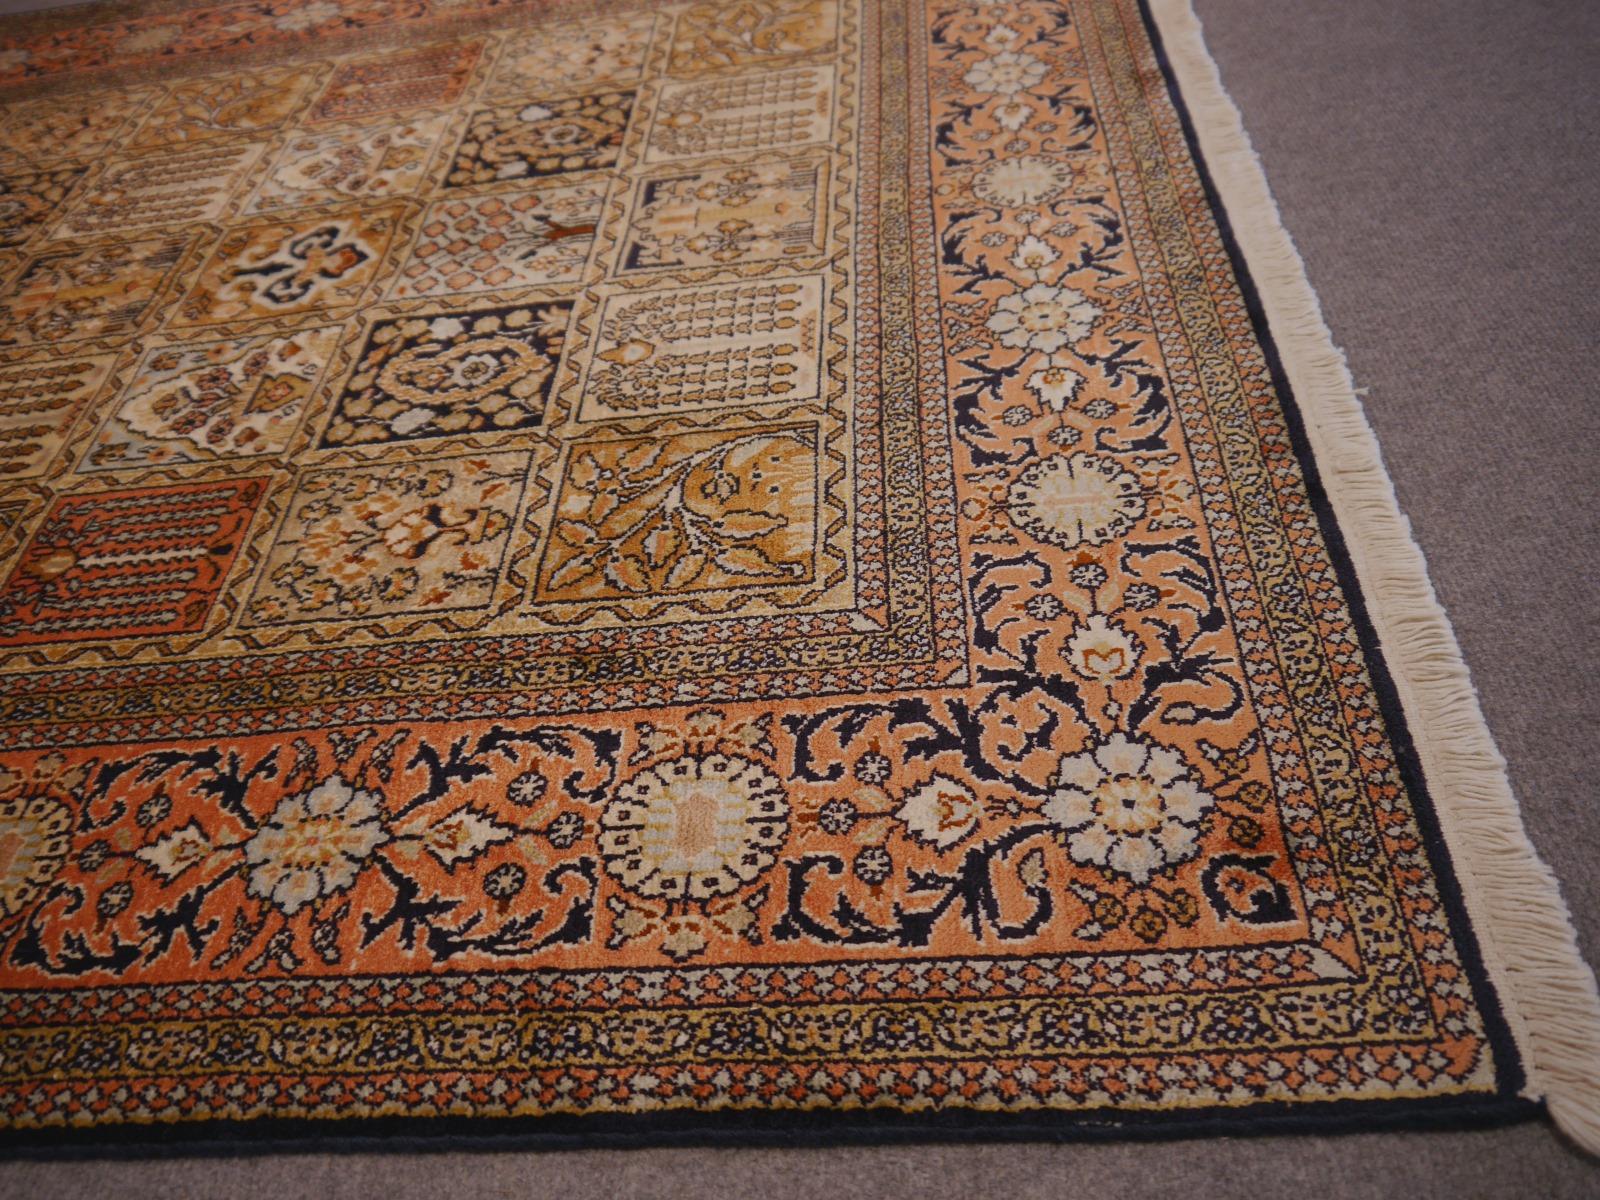 Kashmir Pure Silk Indian Rug with Panel Design In Good Condition For Sale In Lohr, Bavaria, DE